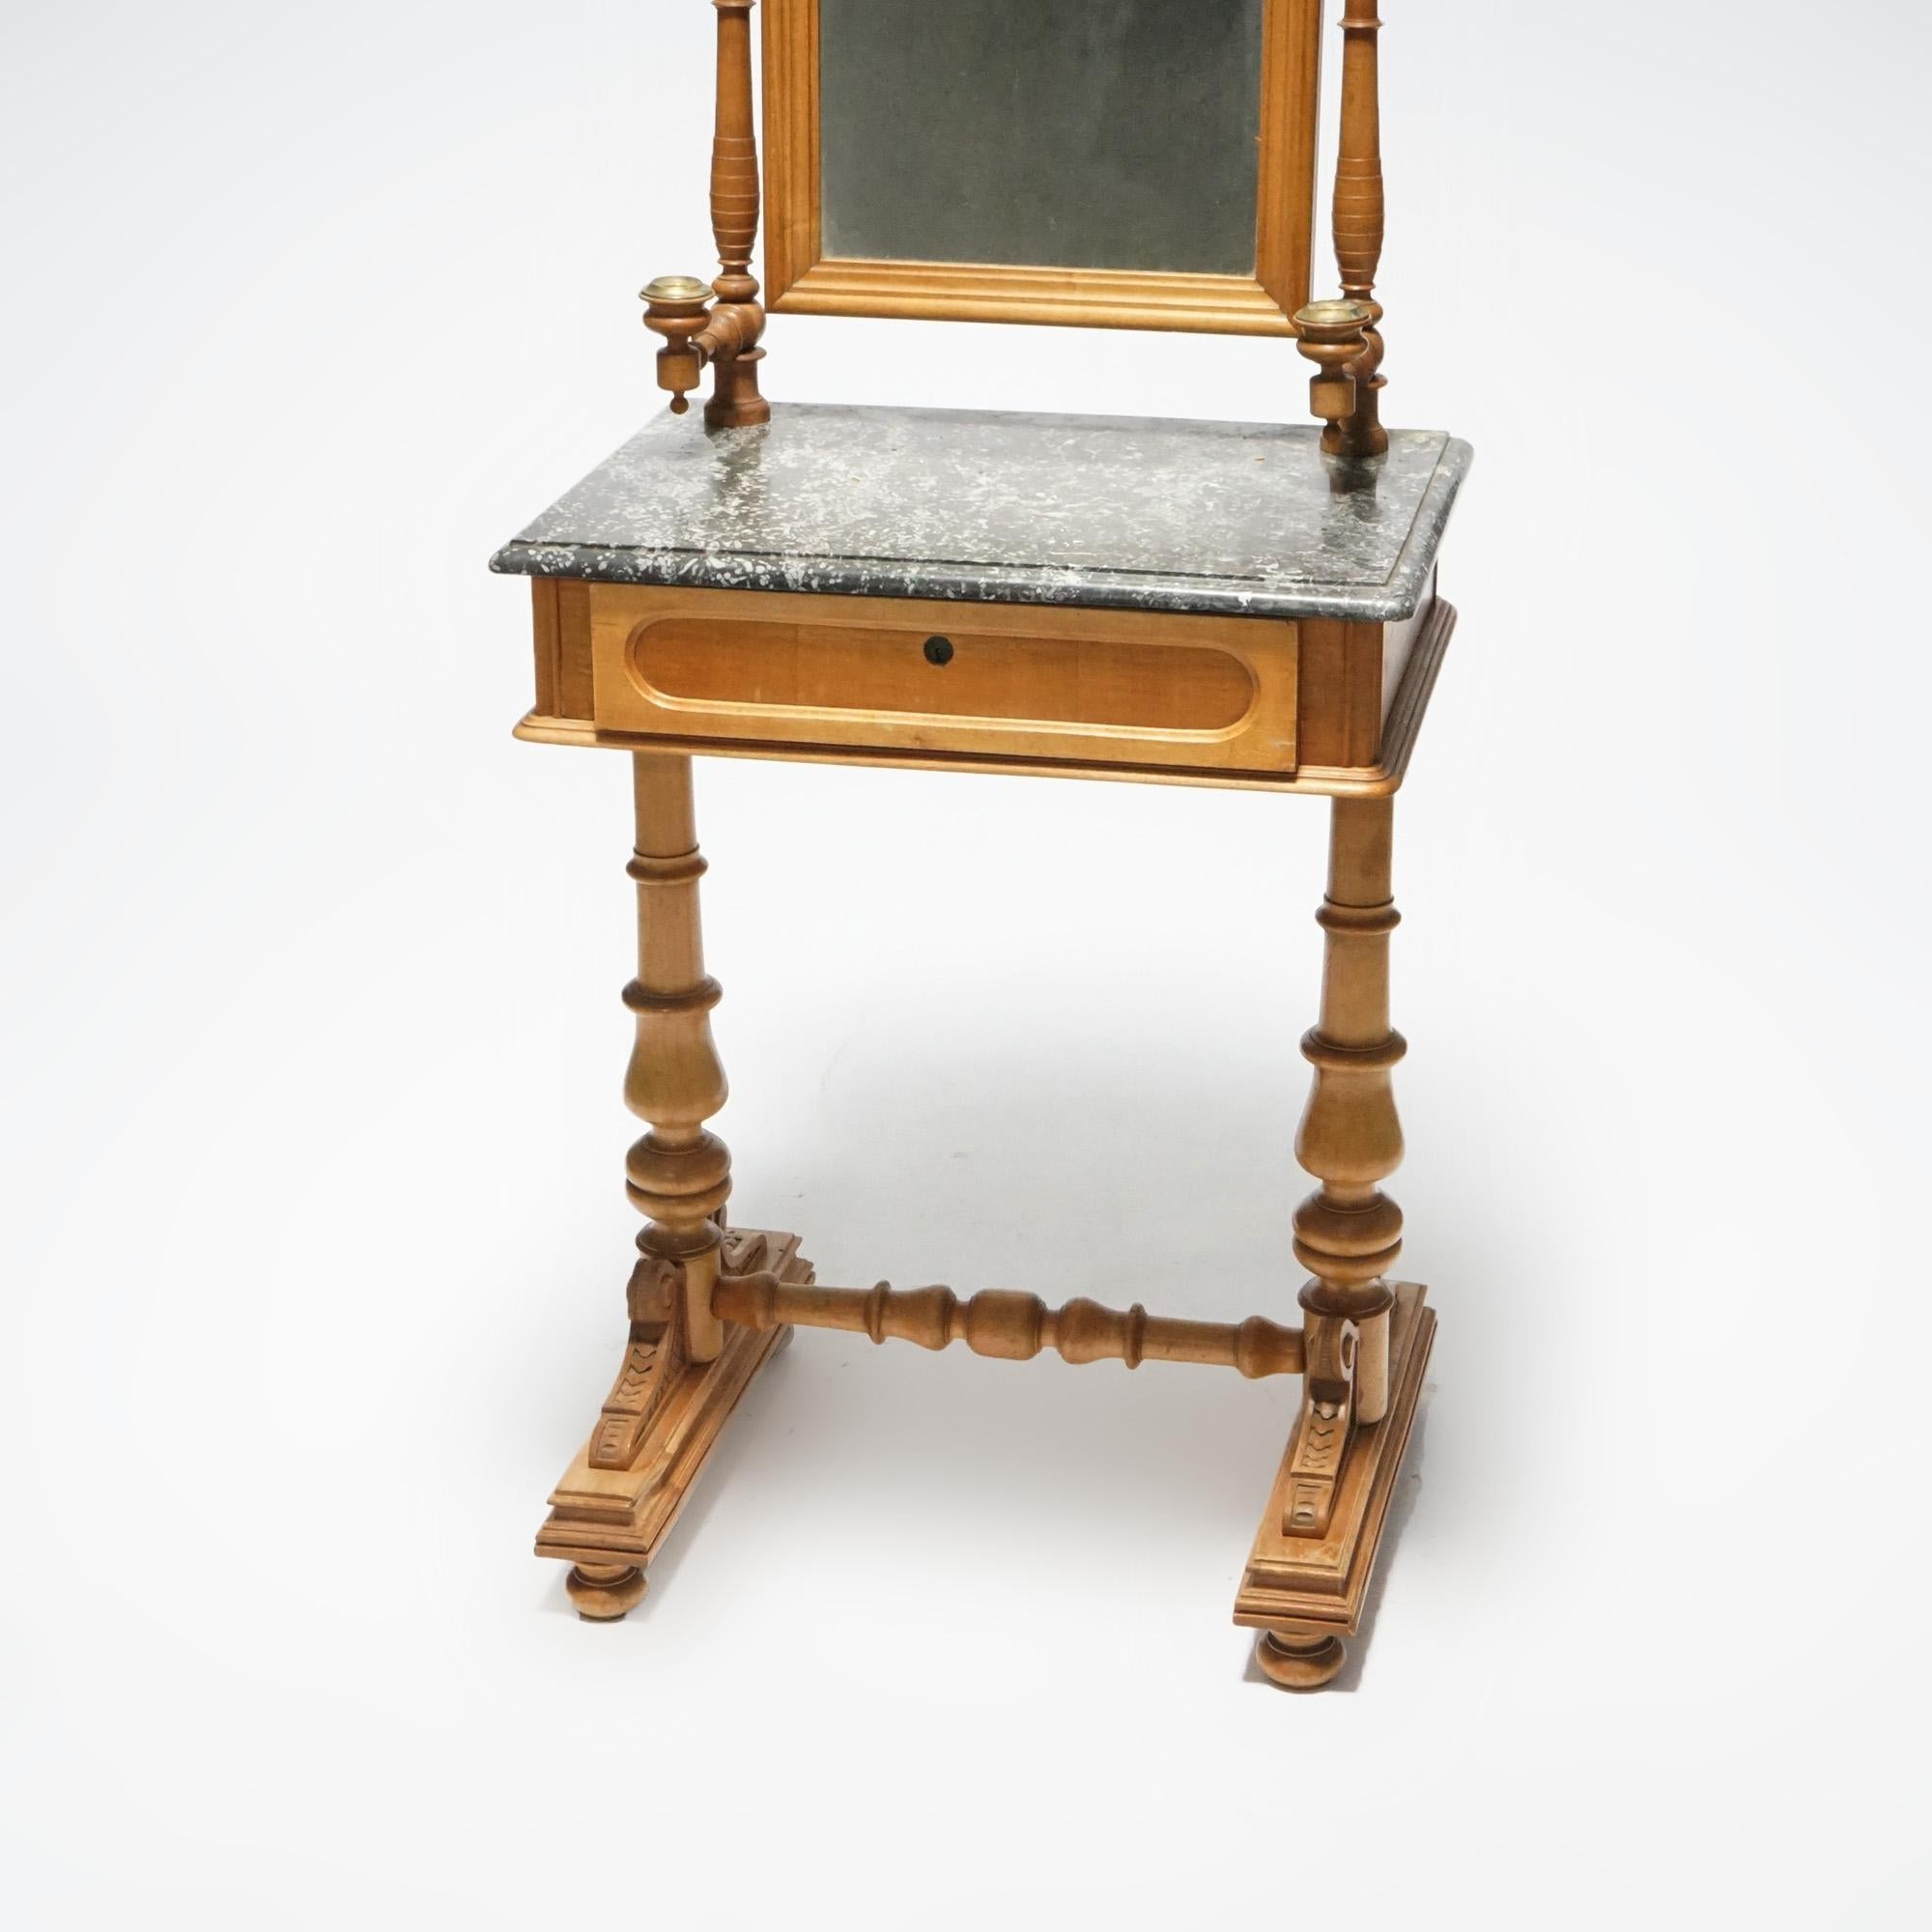 19th Century Antique Walnut & Burl Marble Top Dressing Table, Mirror & Candle Stands, 19th C.